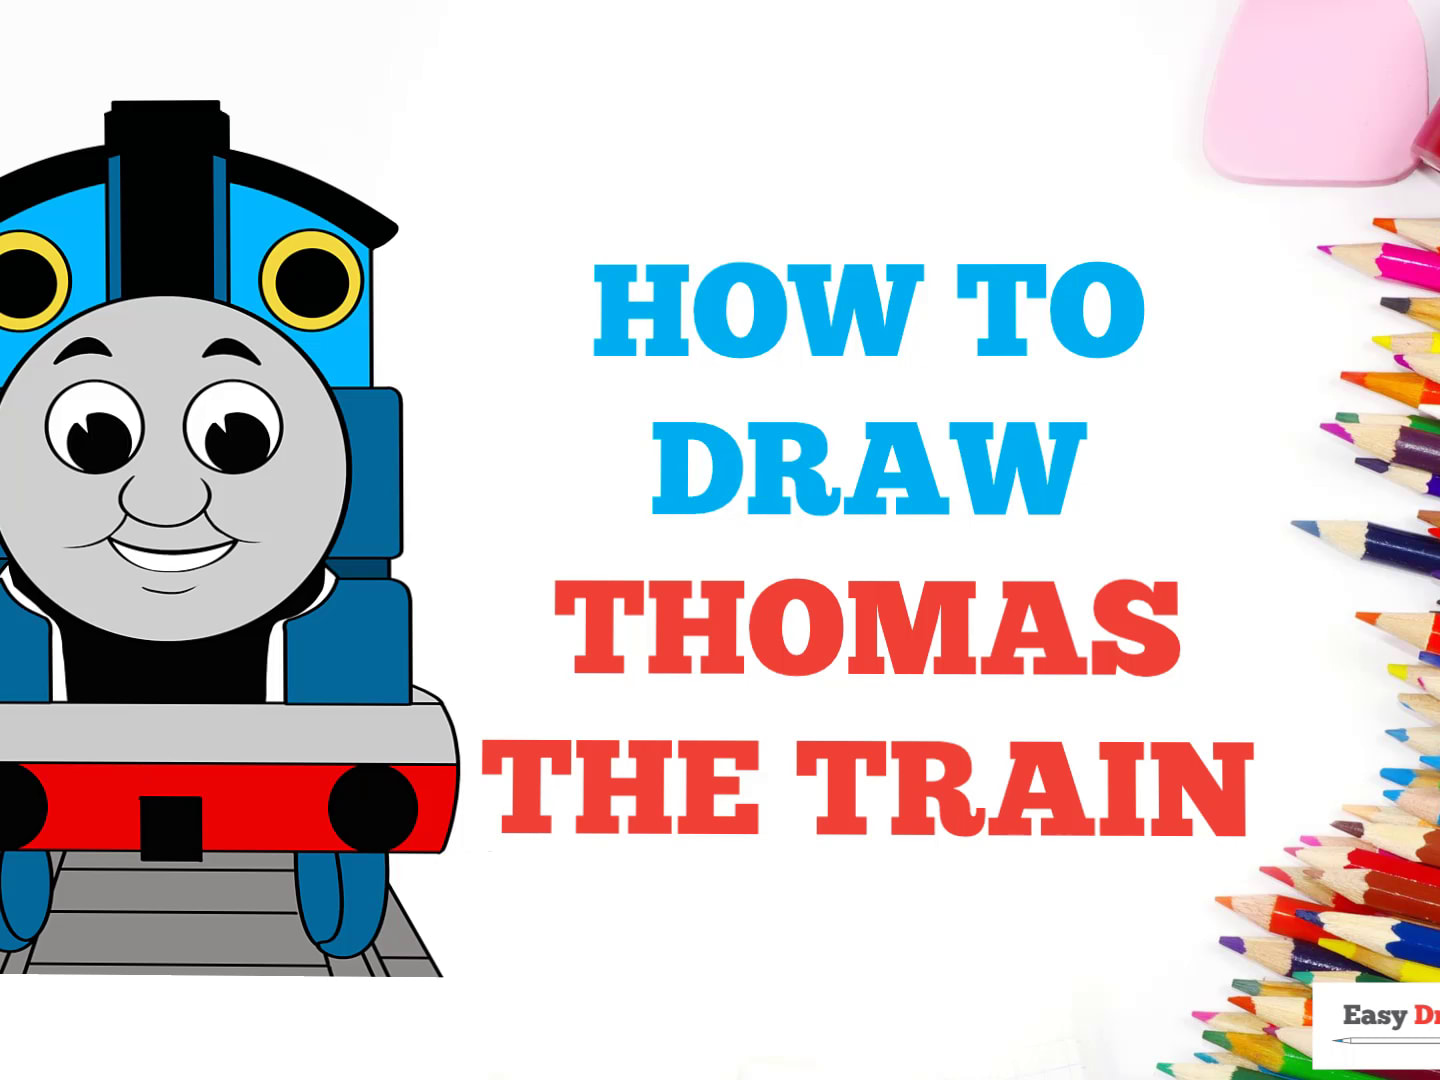 How to Draw Thomas the Train - Really Easy Drawing Tutorial